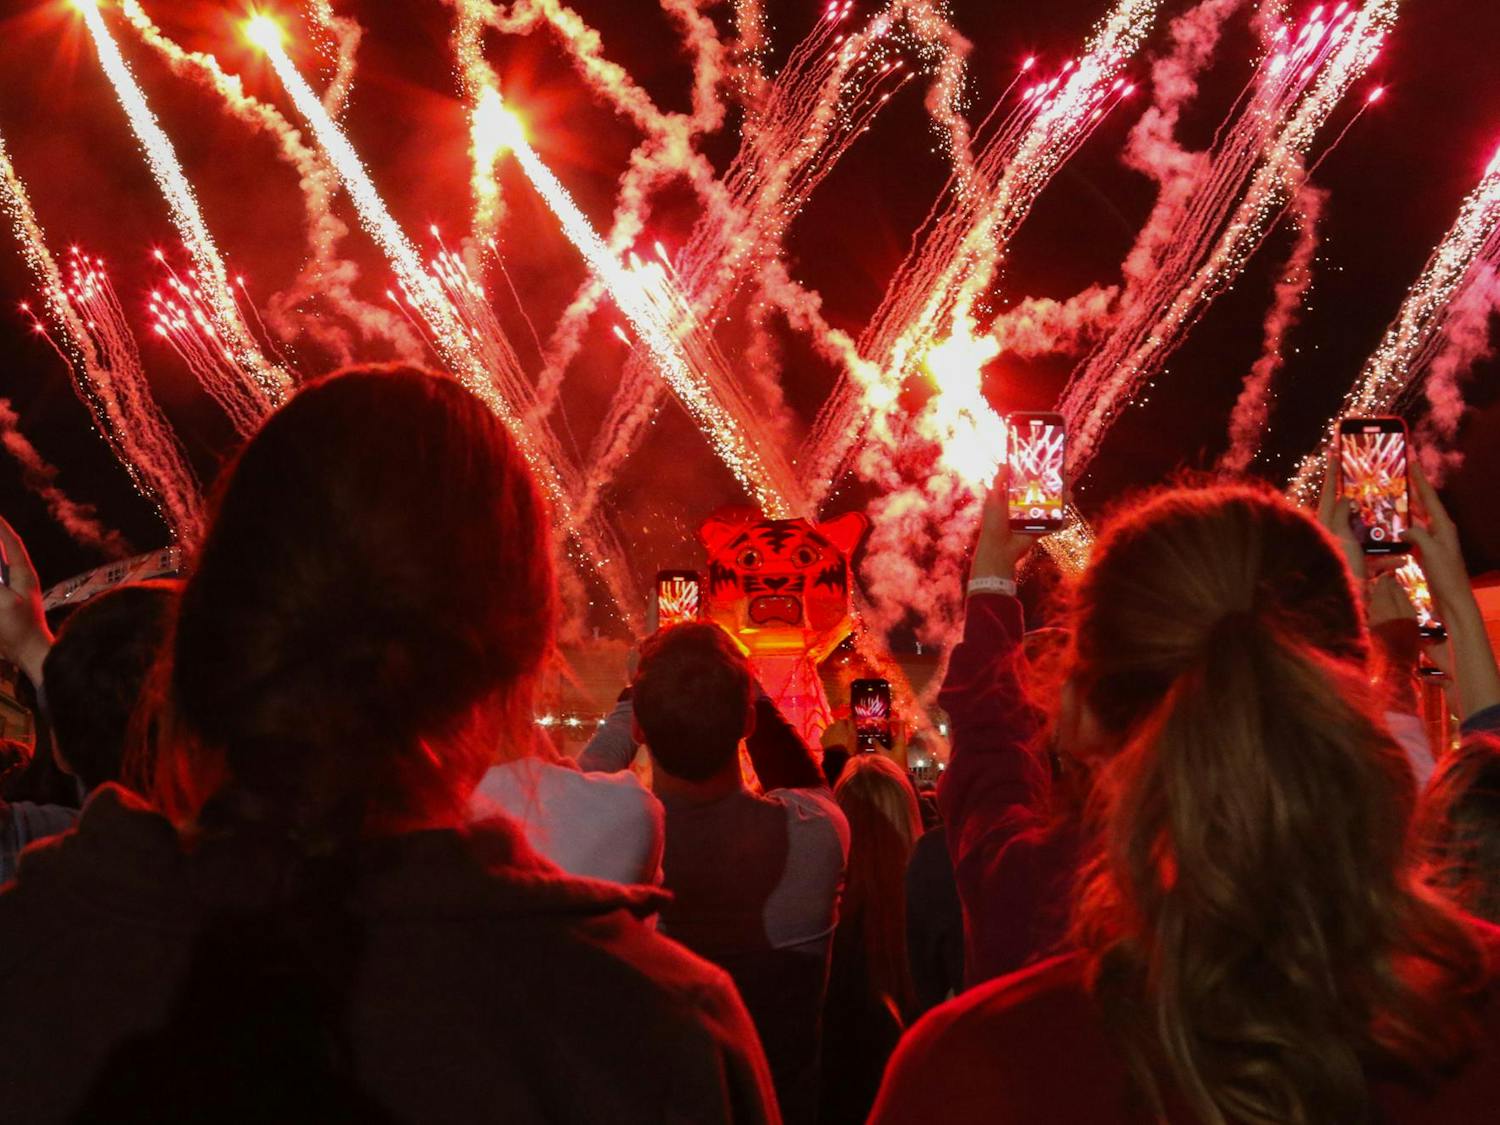 University of South Carolina students watch and record the wooden tiger go up in flames at the annual Tiger Burn celebration. The burning tiger was accompanied by fireworks and other festivities on Nov. 20, 2023.